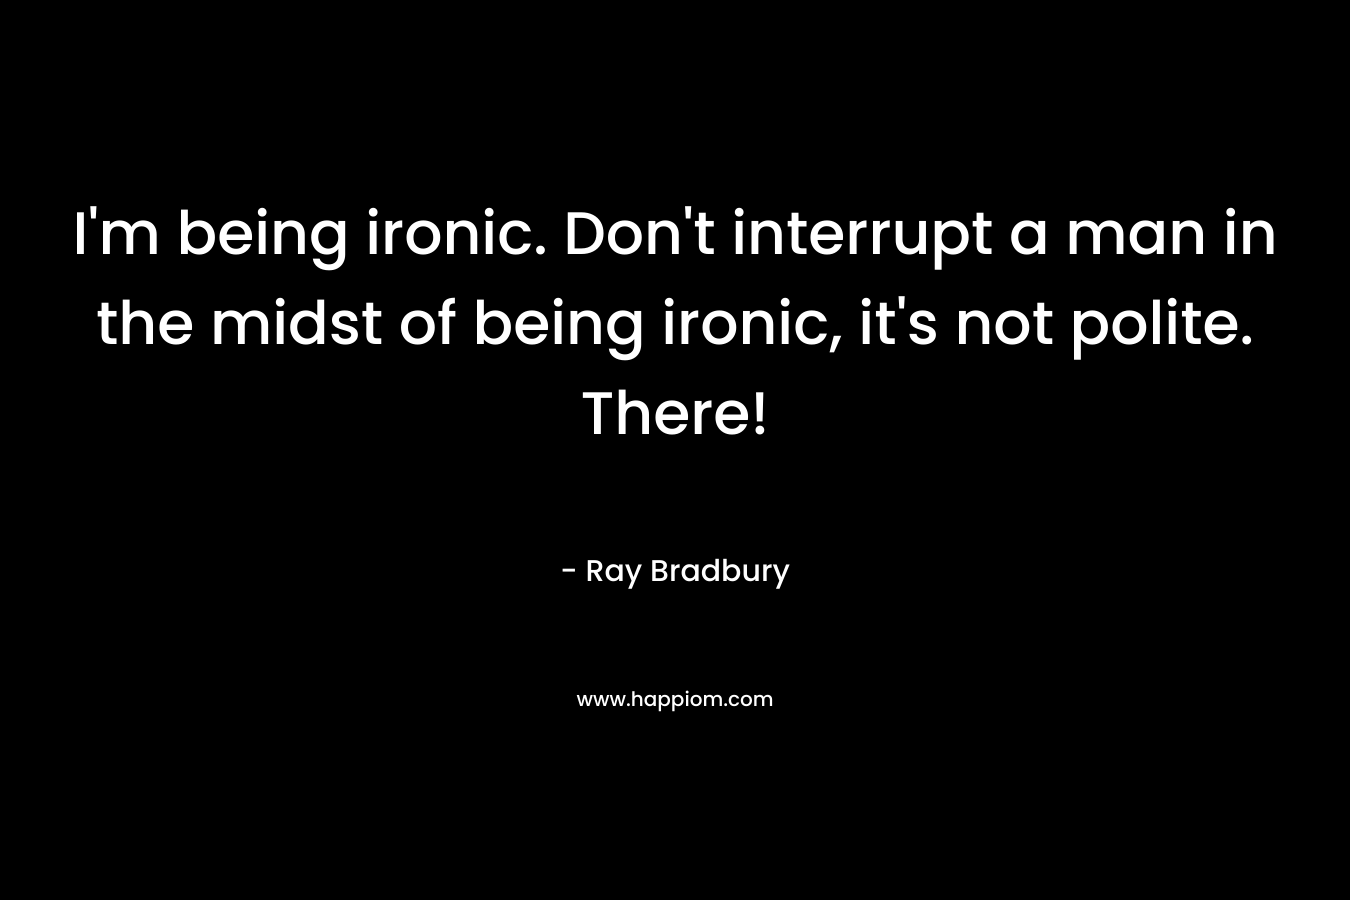 I’m being ironic. Don’t interrupt a man in the midst of being ironic, it’s not polite. There! – Ray Bradbury